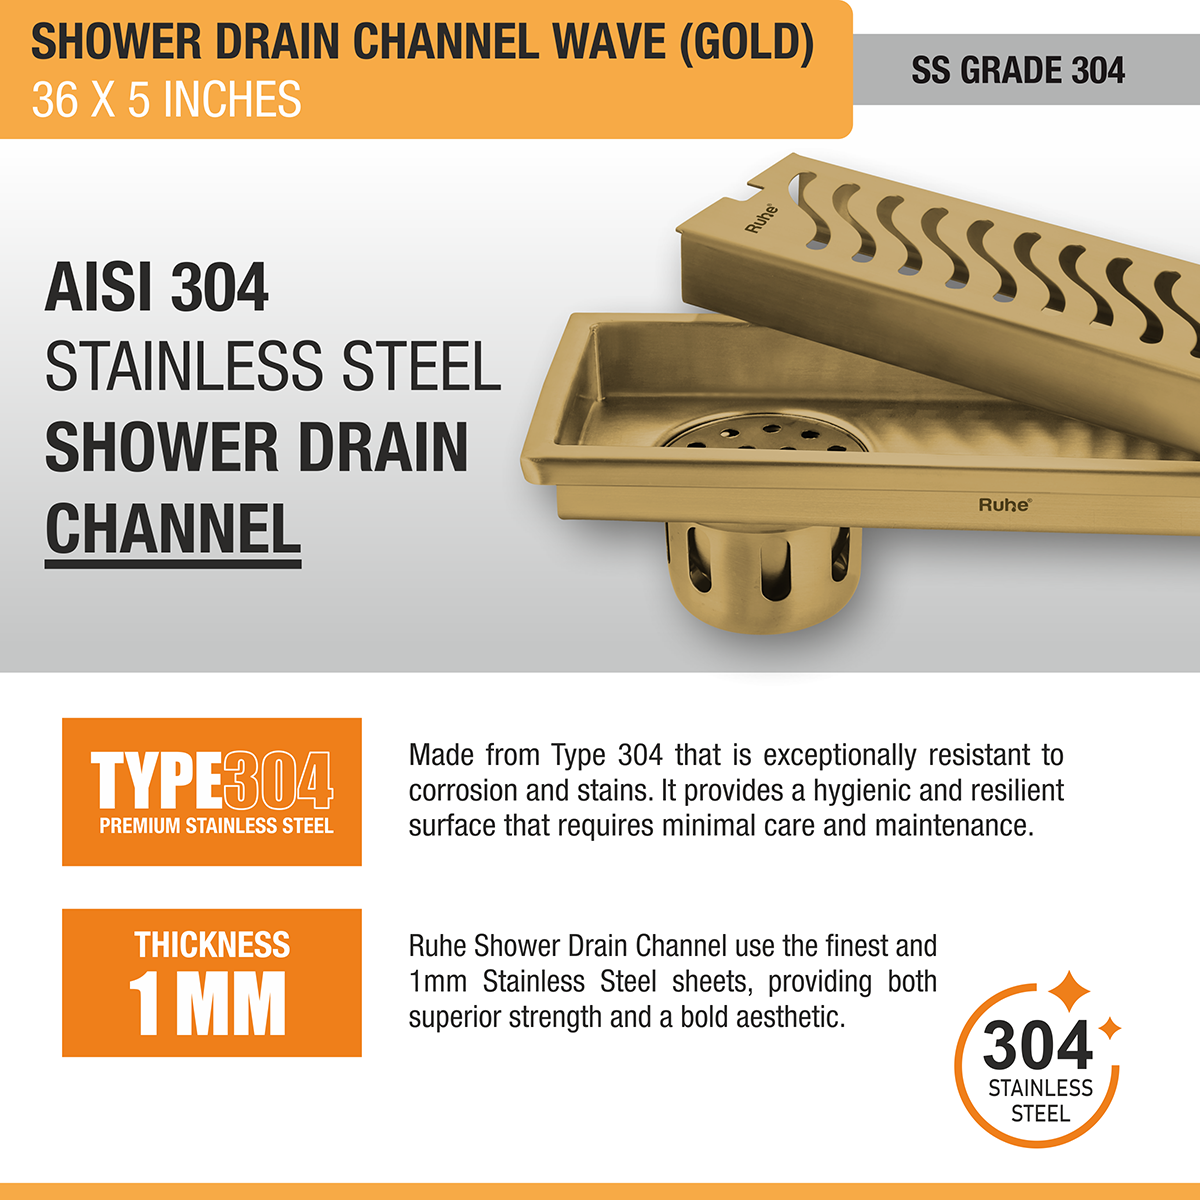 Wave Shower Drain Channel (36 x 5 Inches) YELLOW GOLD stainless steel